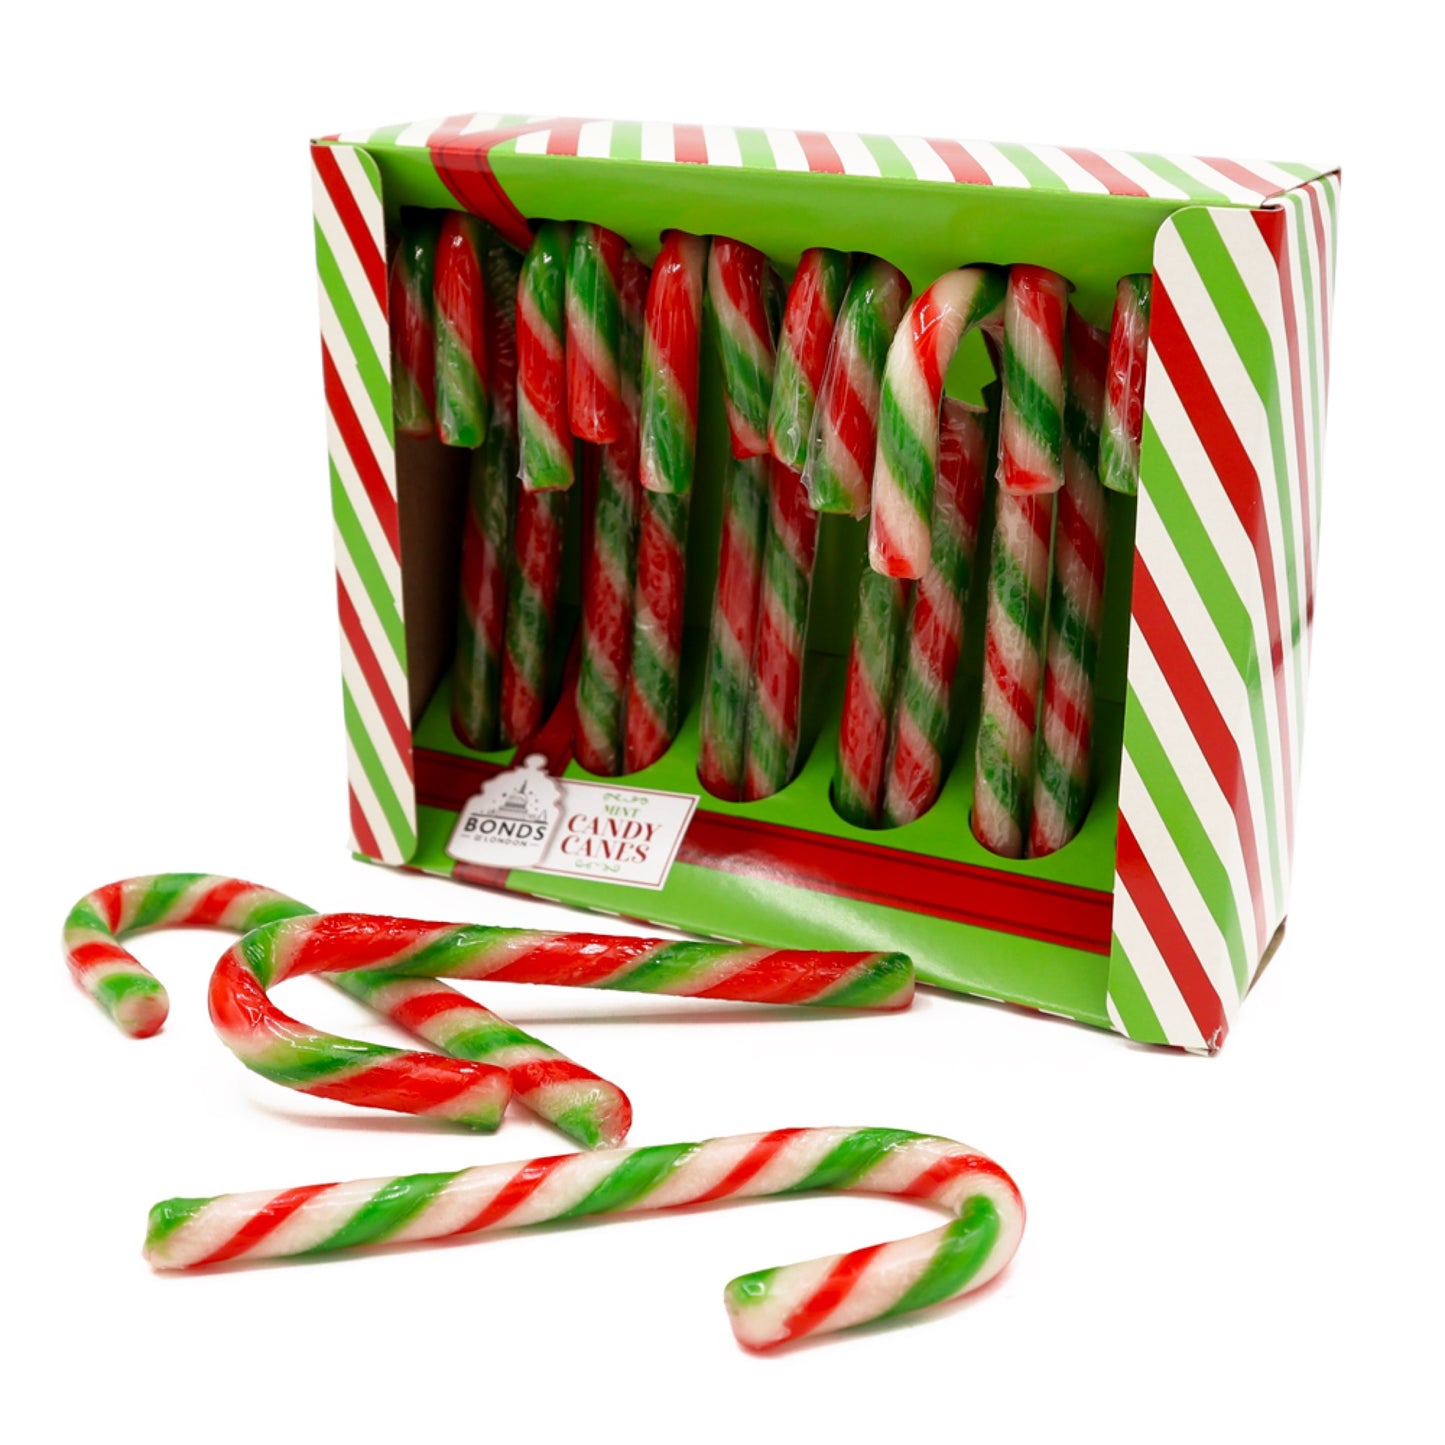 Bonds Peppermint Candy Canes (box of 12)